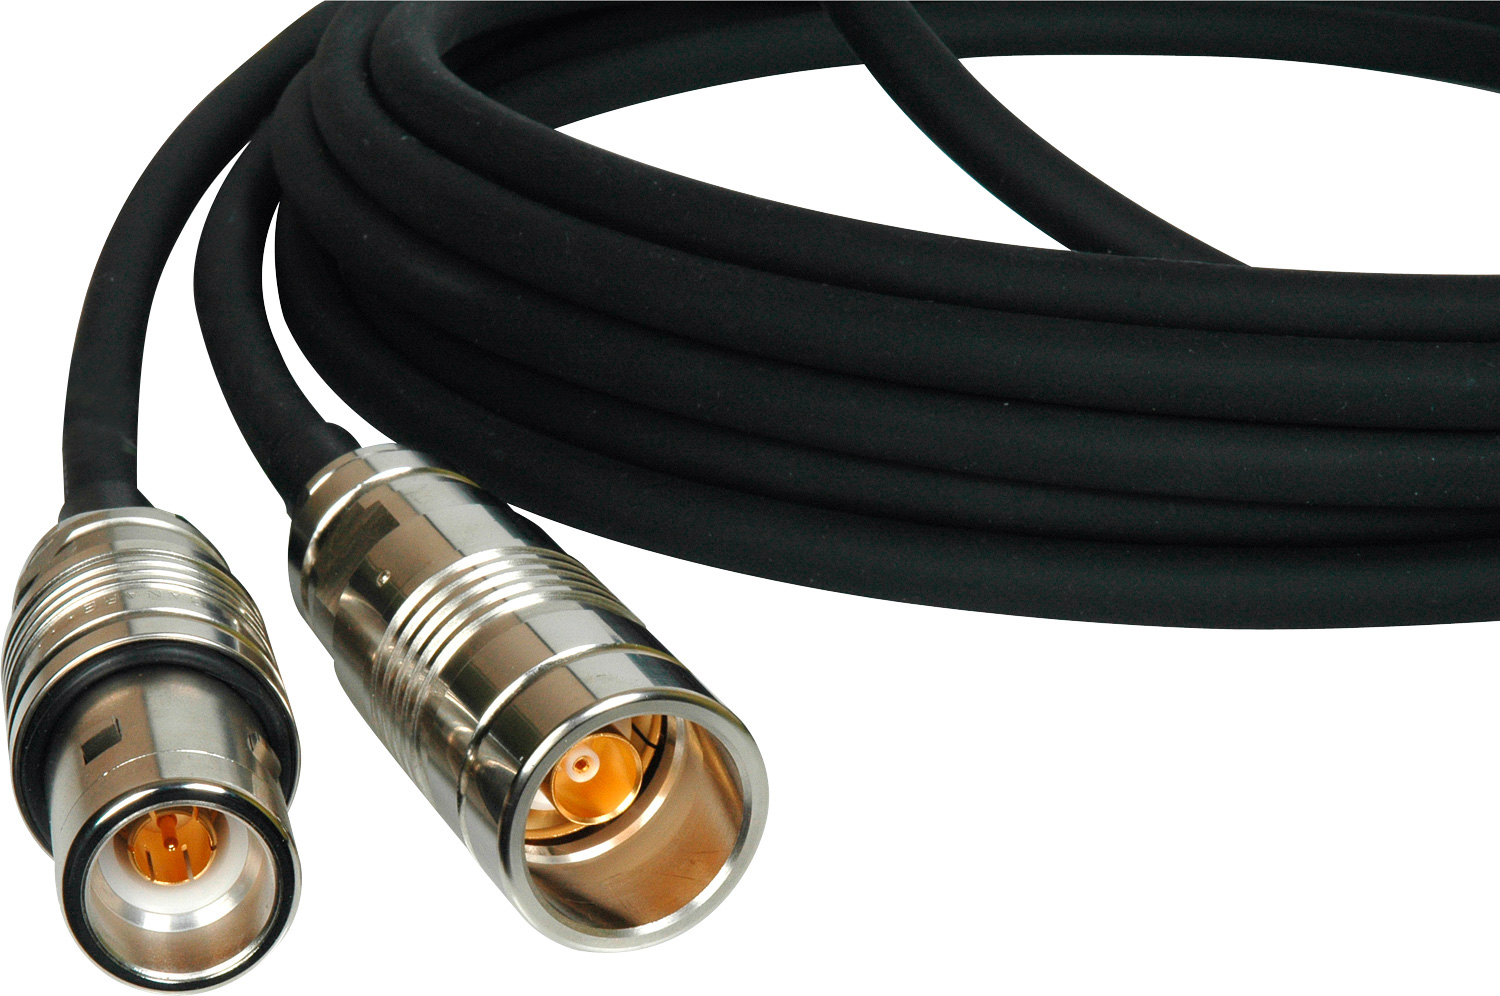 Laird TRI-1857A-30 Belden 1857A RG59/U Stranded Triax Male to Female Cable - 30 Foot